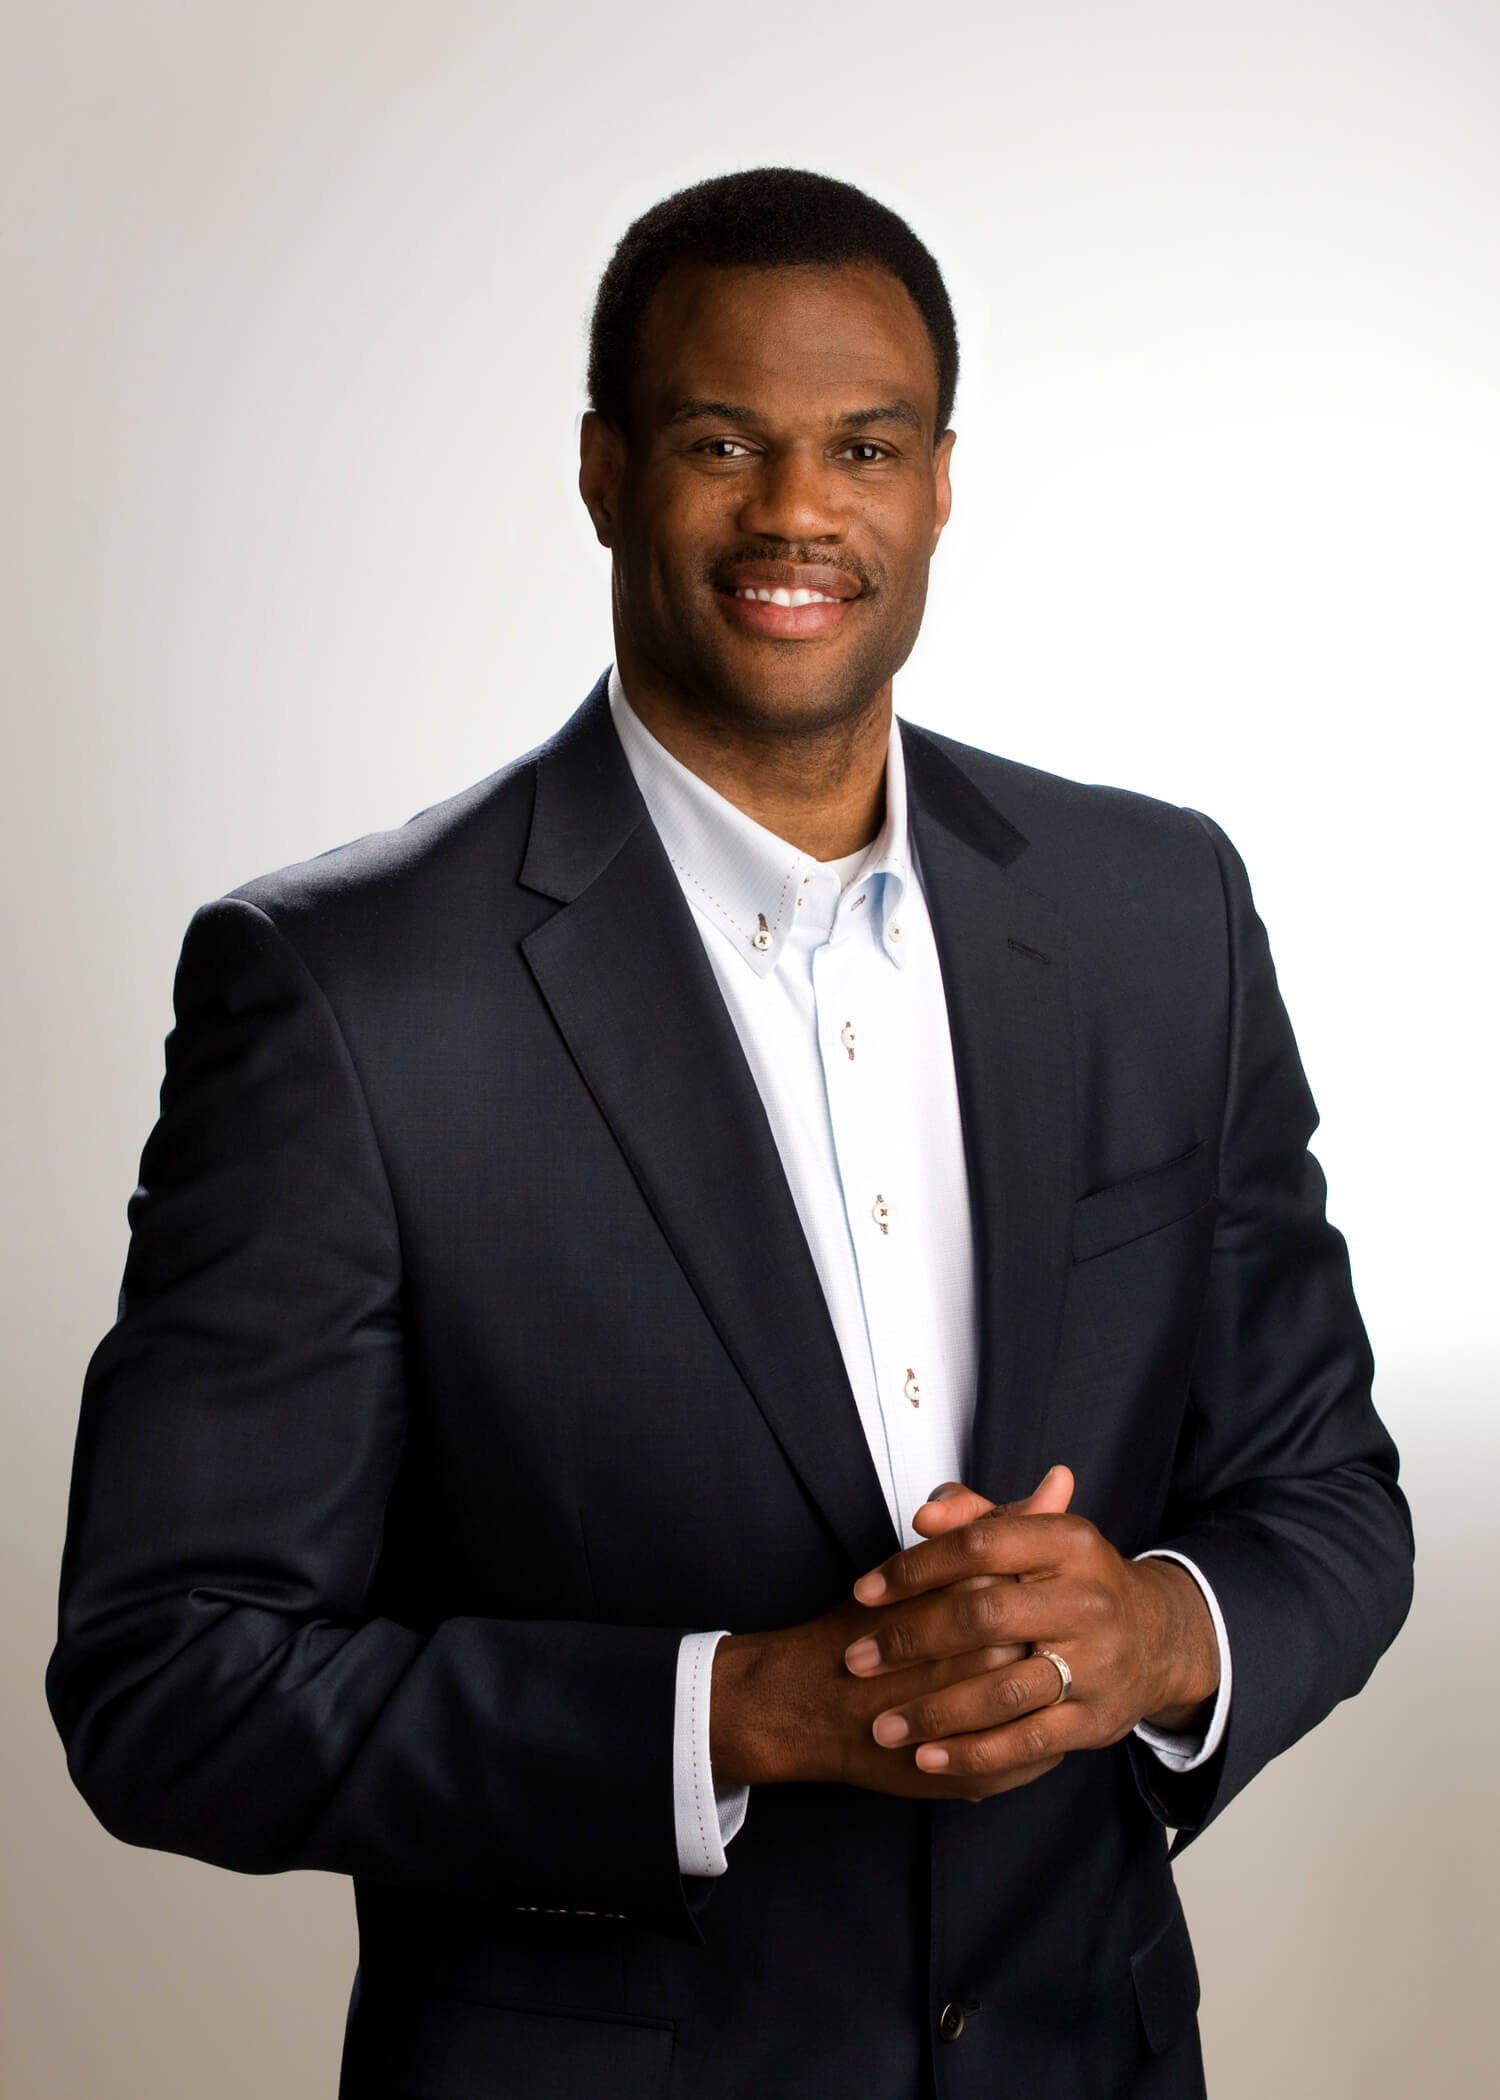 Hire NBA Great David Robinson for Your Event | PDA Speakers